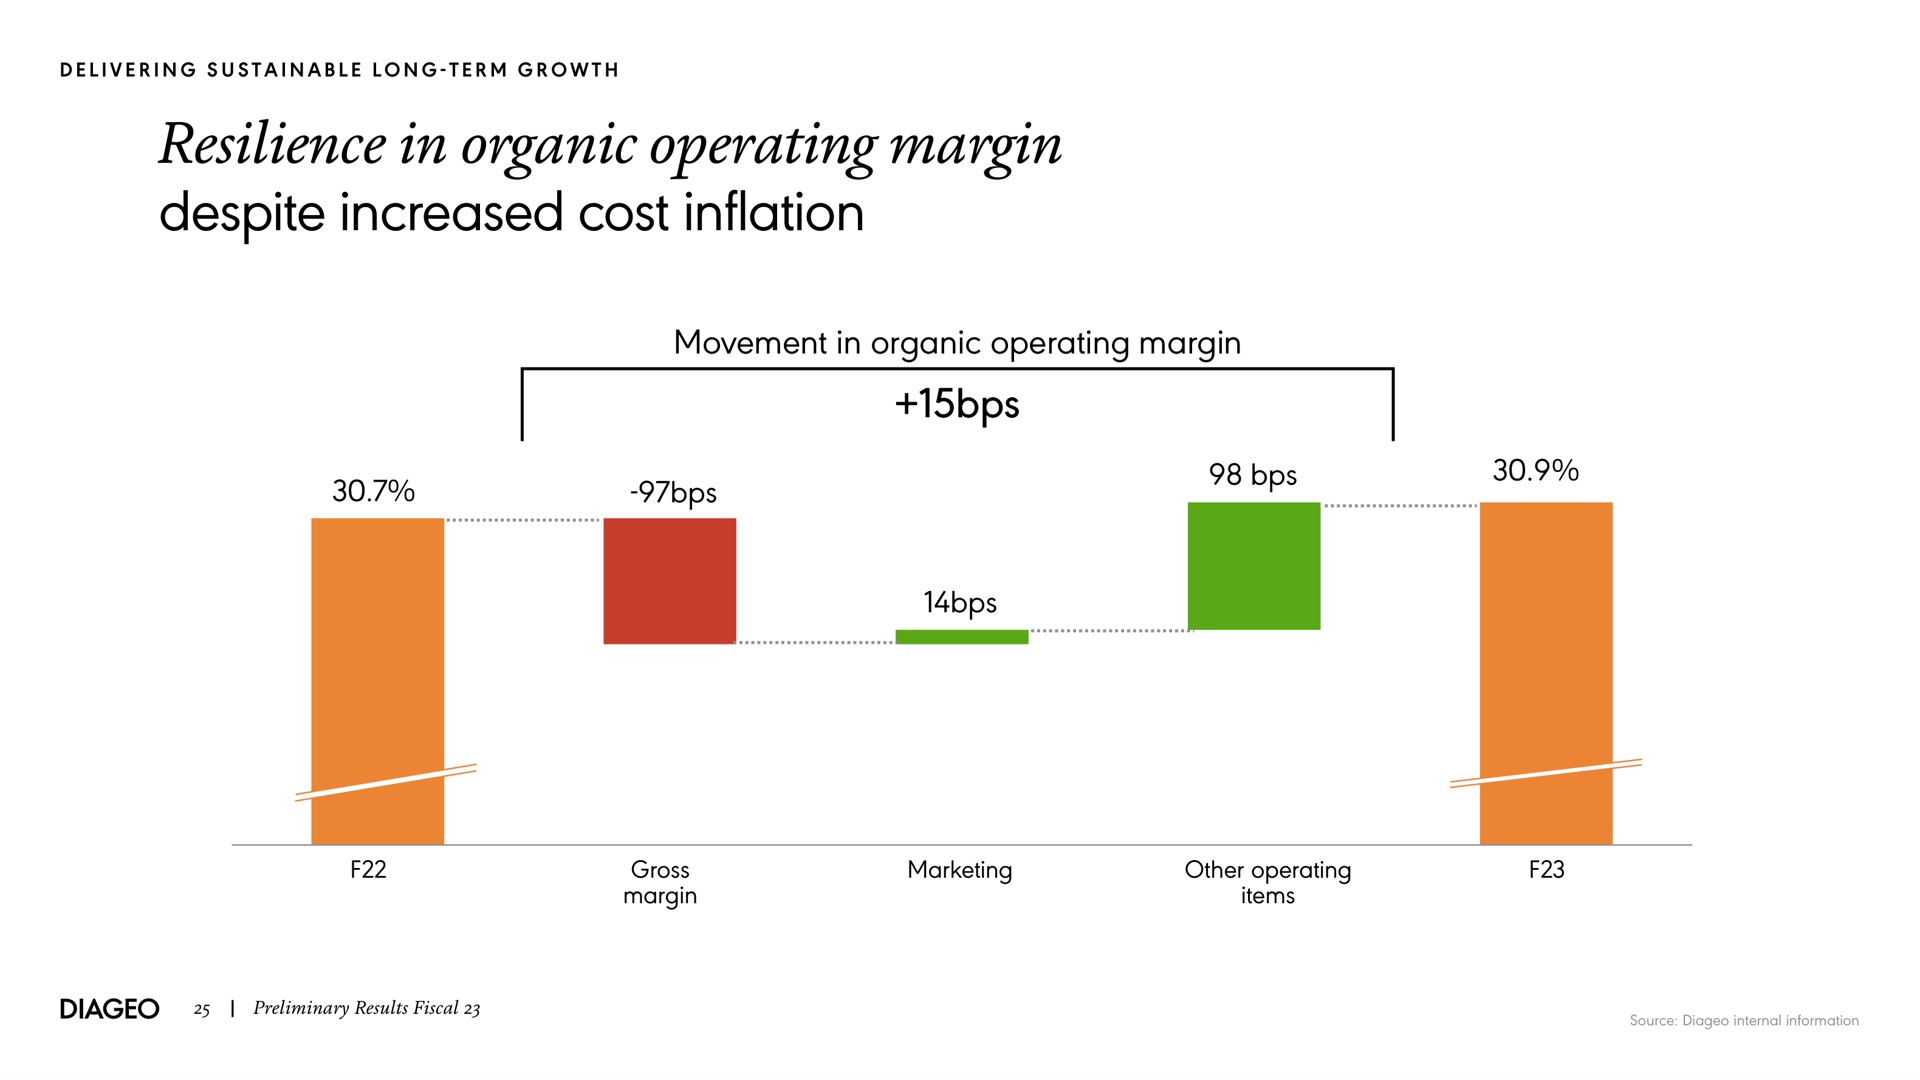 resilience in organic operating margin despite increased cost inflation movement in organic operating margin | Diageo